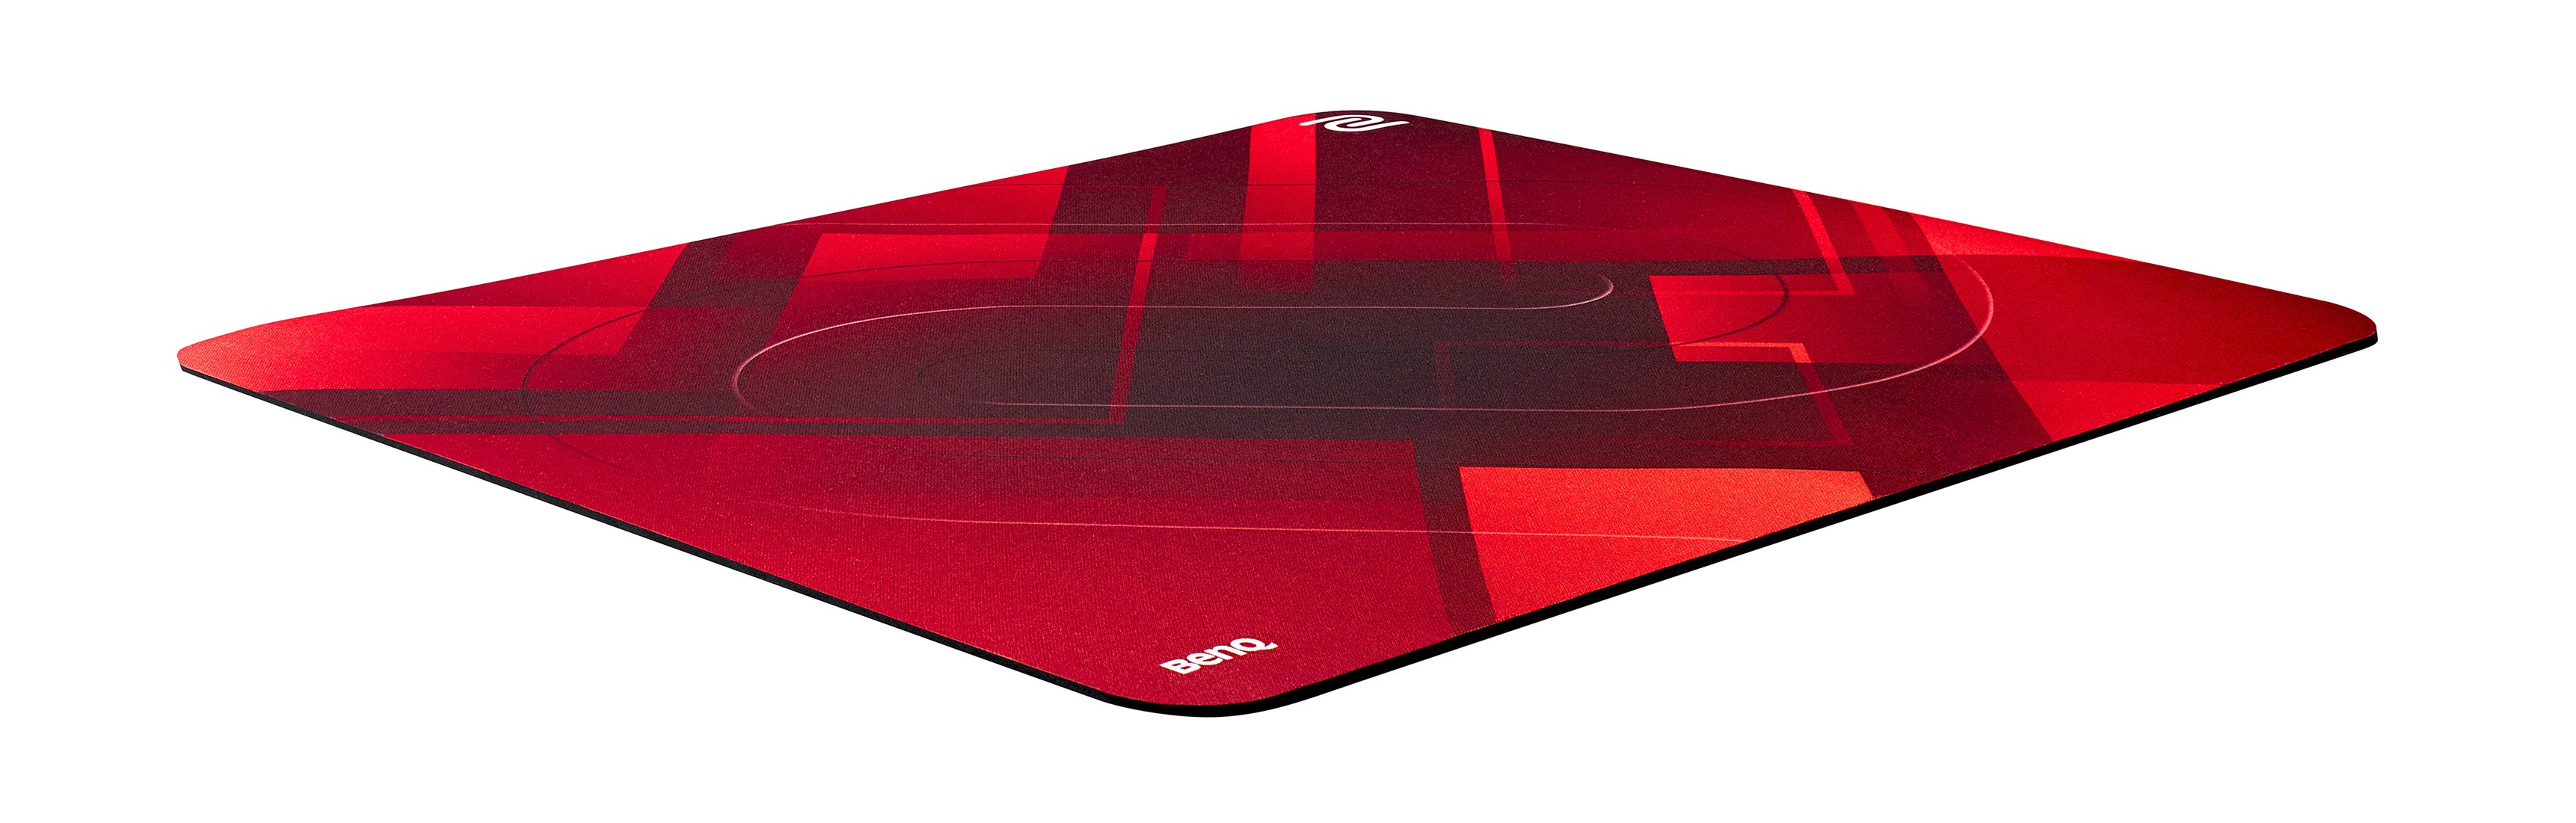 Zowie We Are Introducing The G Sr Se In Red Version Which Maintains The Same Surface Of The Original G Sr Se With A Different Design Product Availability On Selected Stores Will